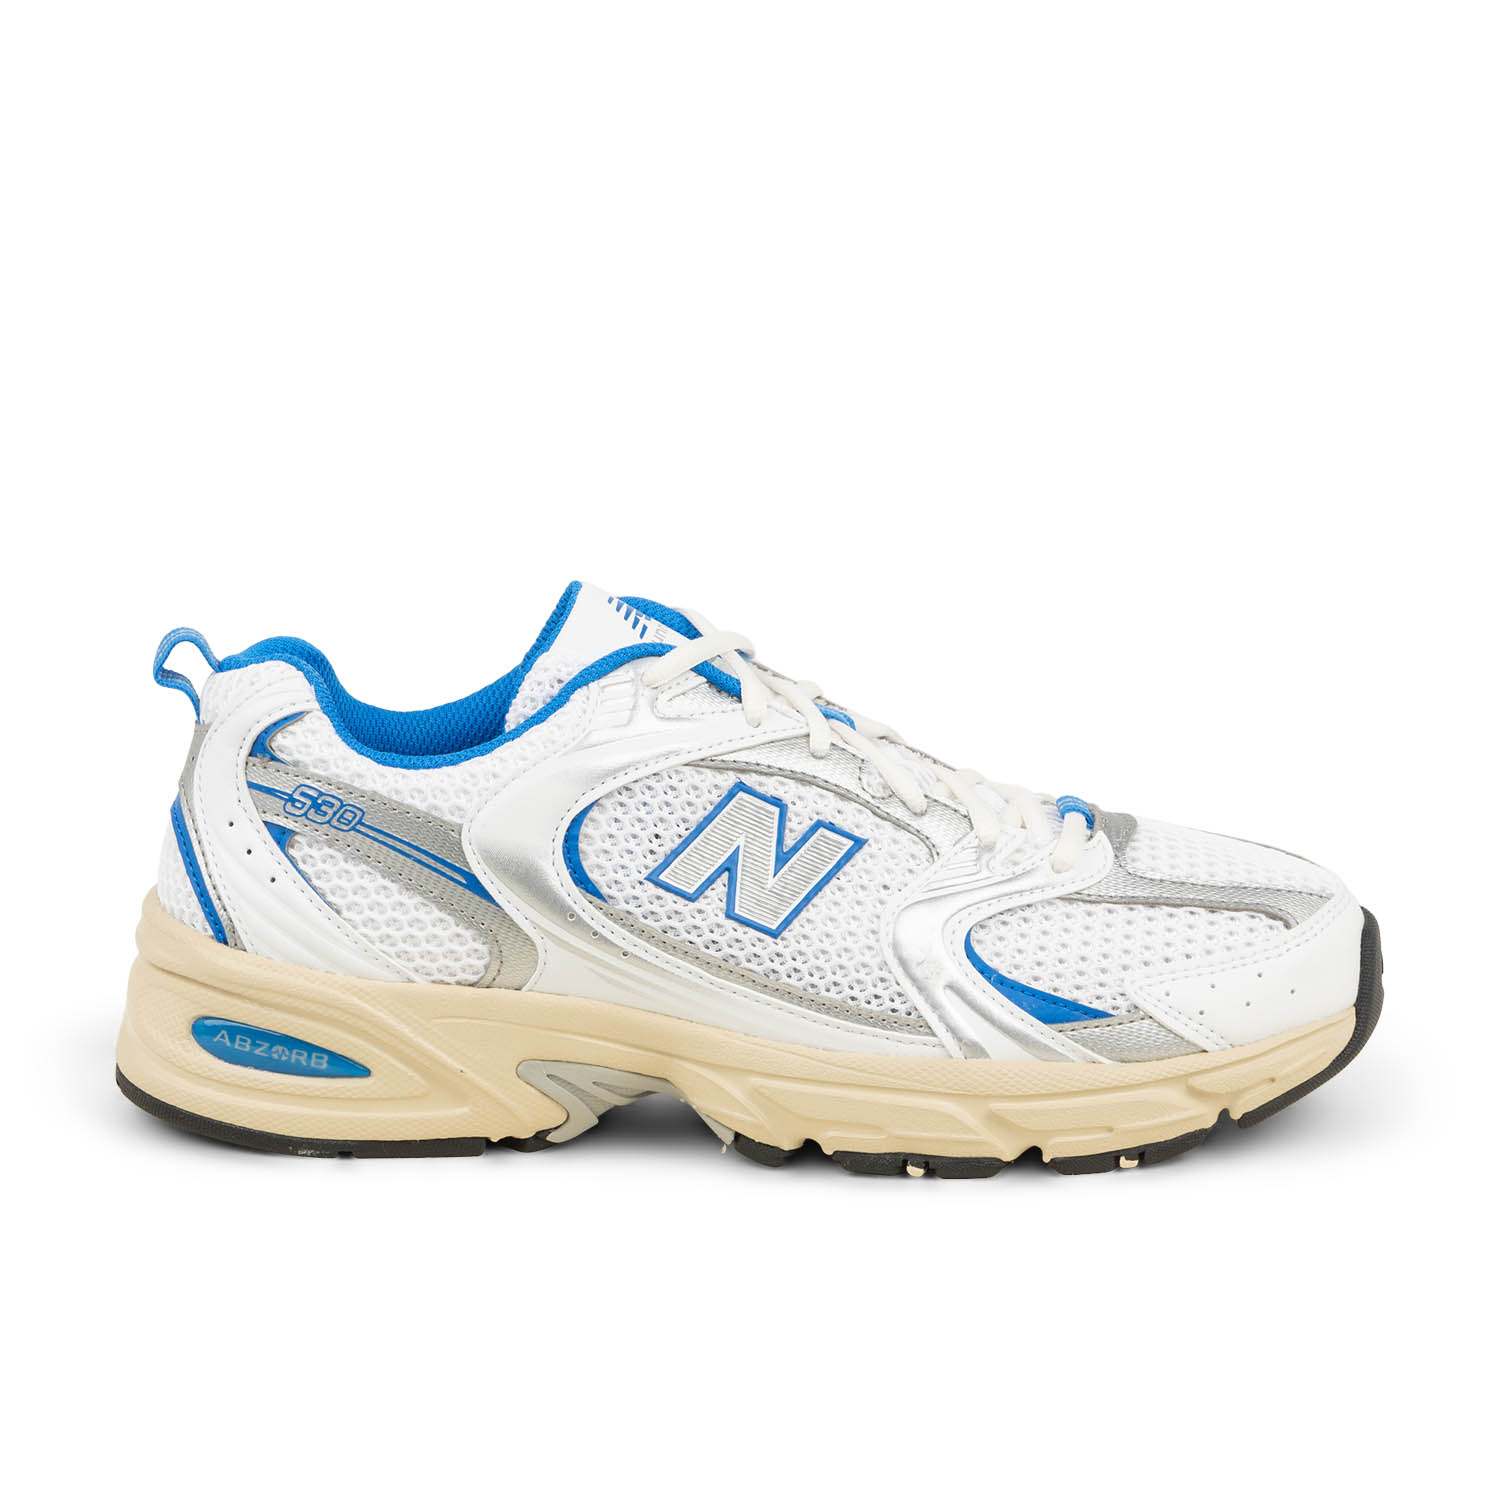 01 - MR530 - NEW BALANCE -  - Synthétique